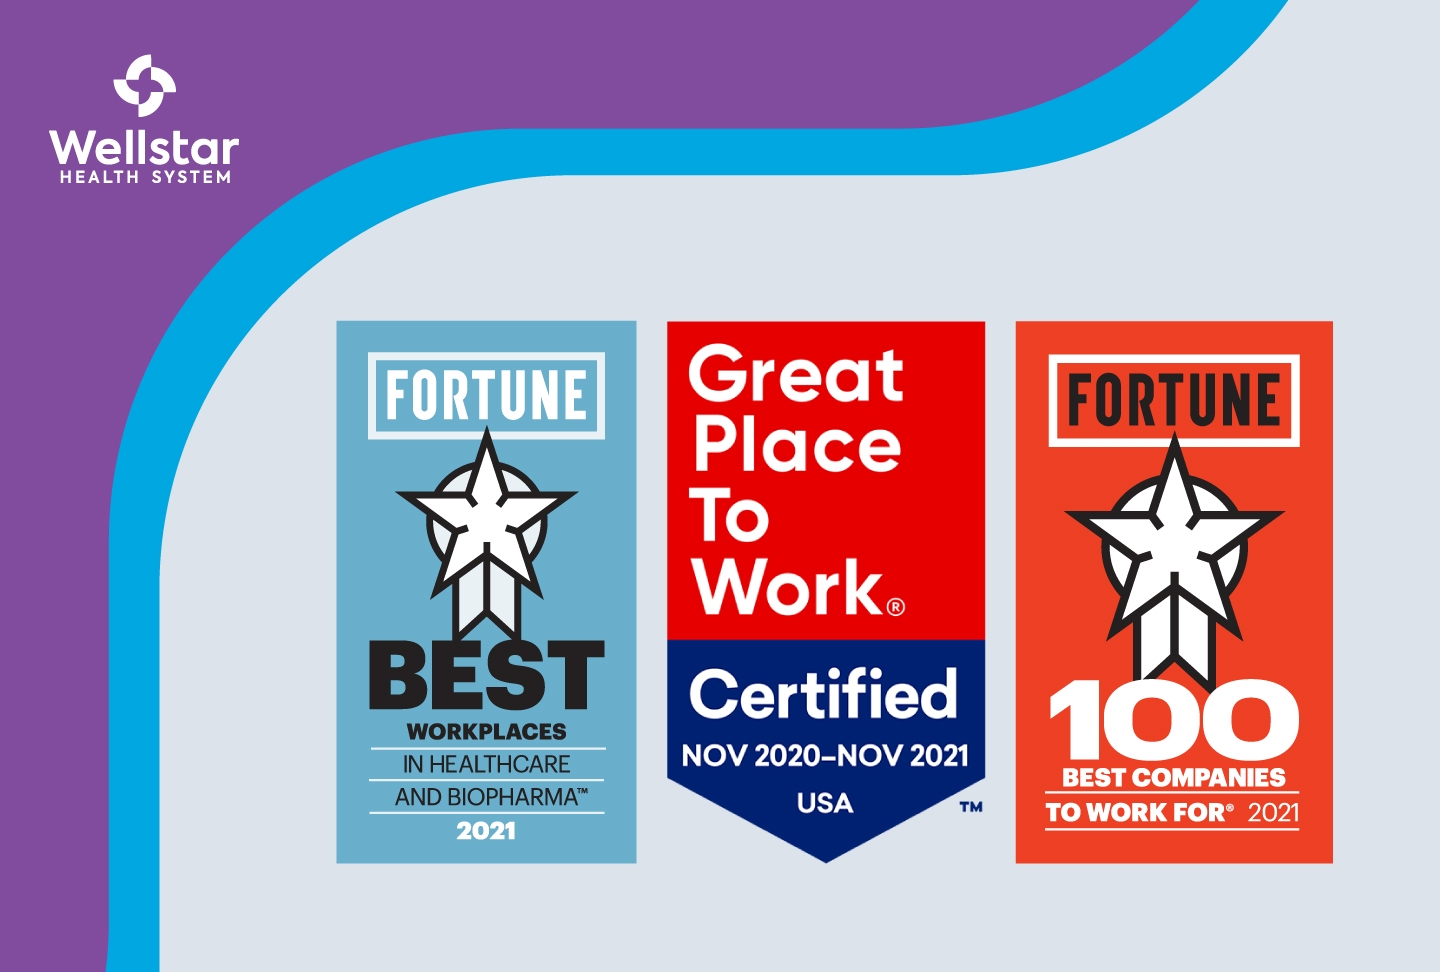 Logos for Fortune 100 Best Places to Work, Best Workplaces in Healthcare & Biopharma and GPTW Certified.